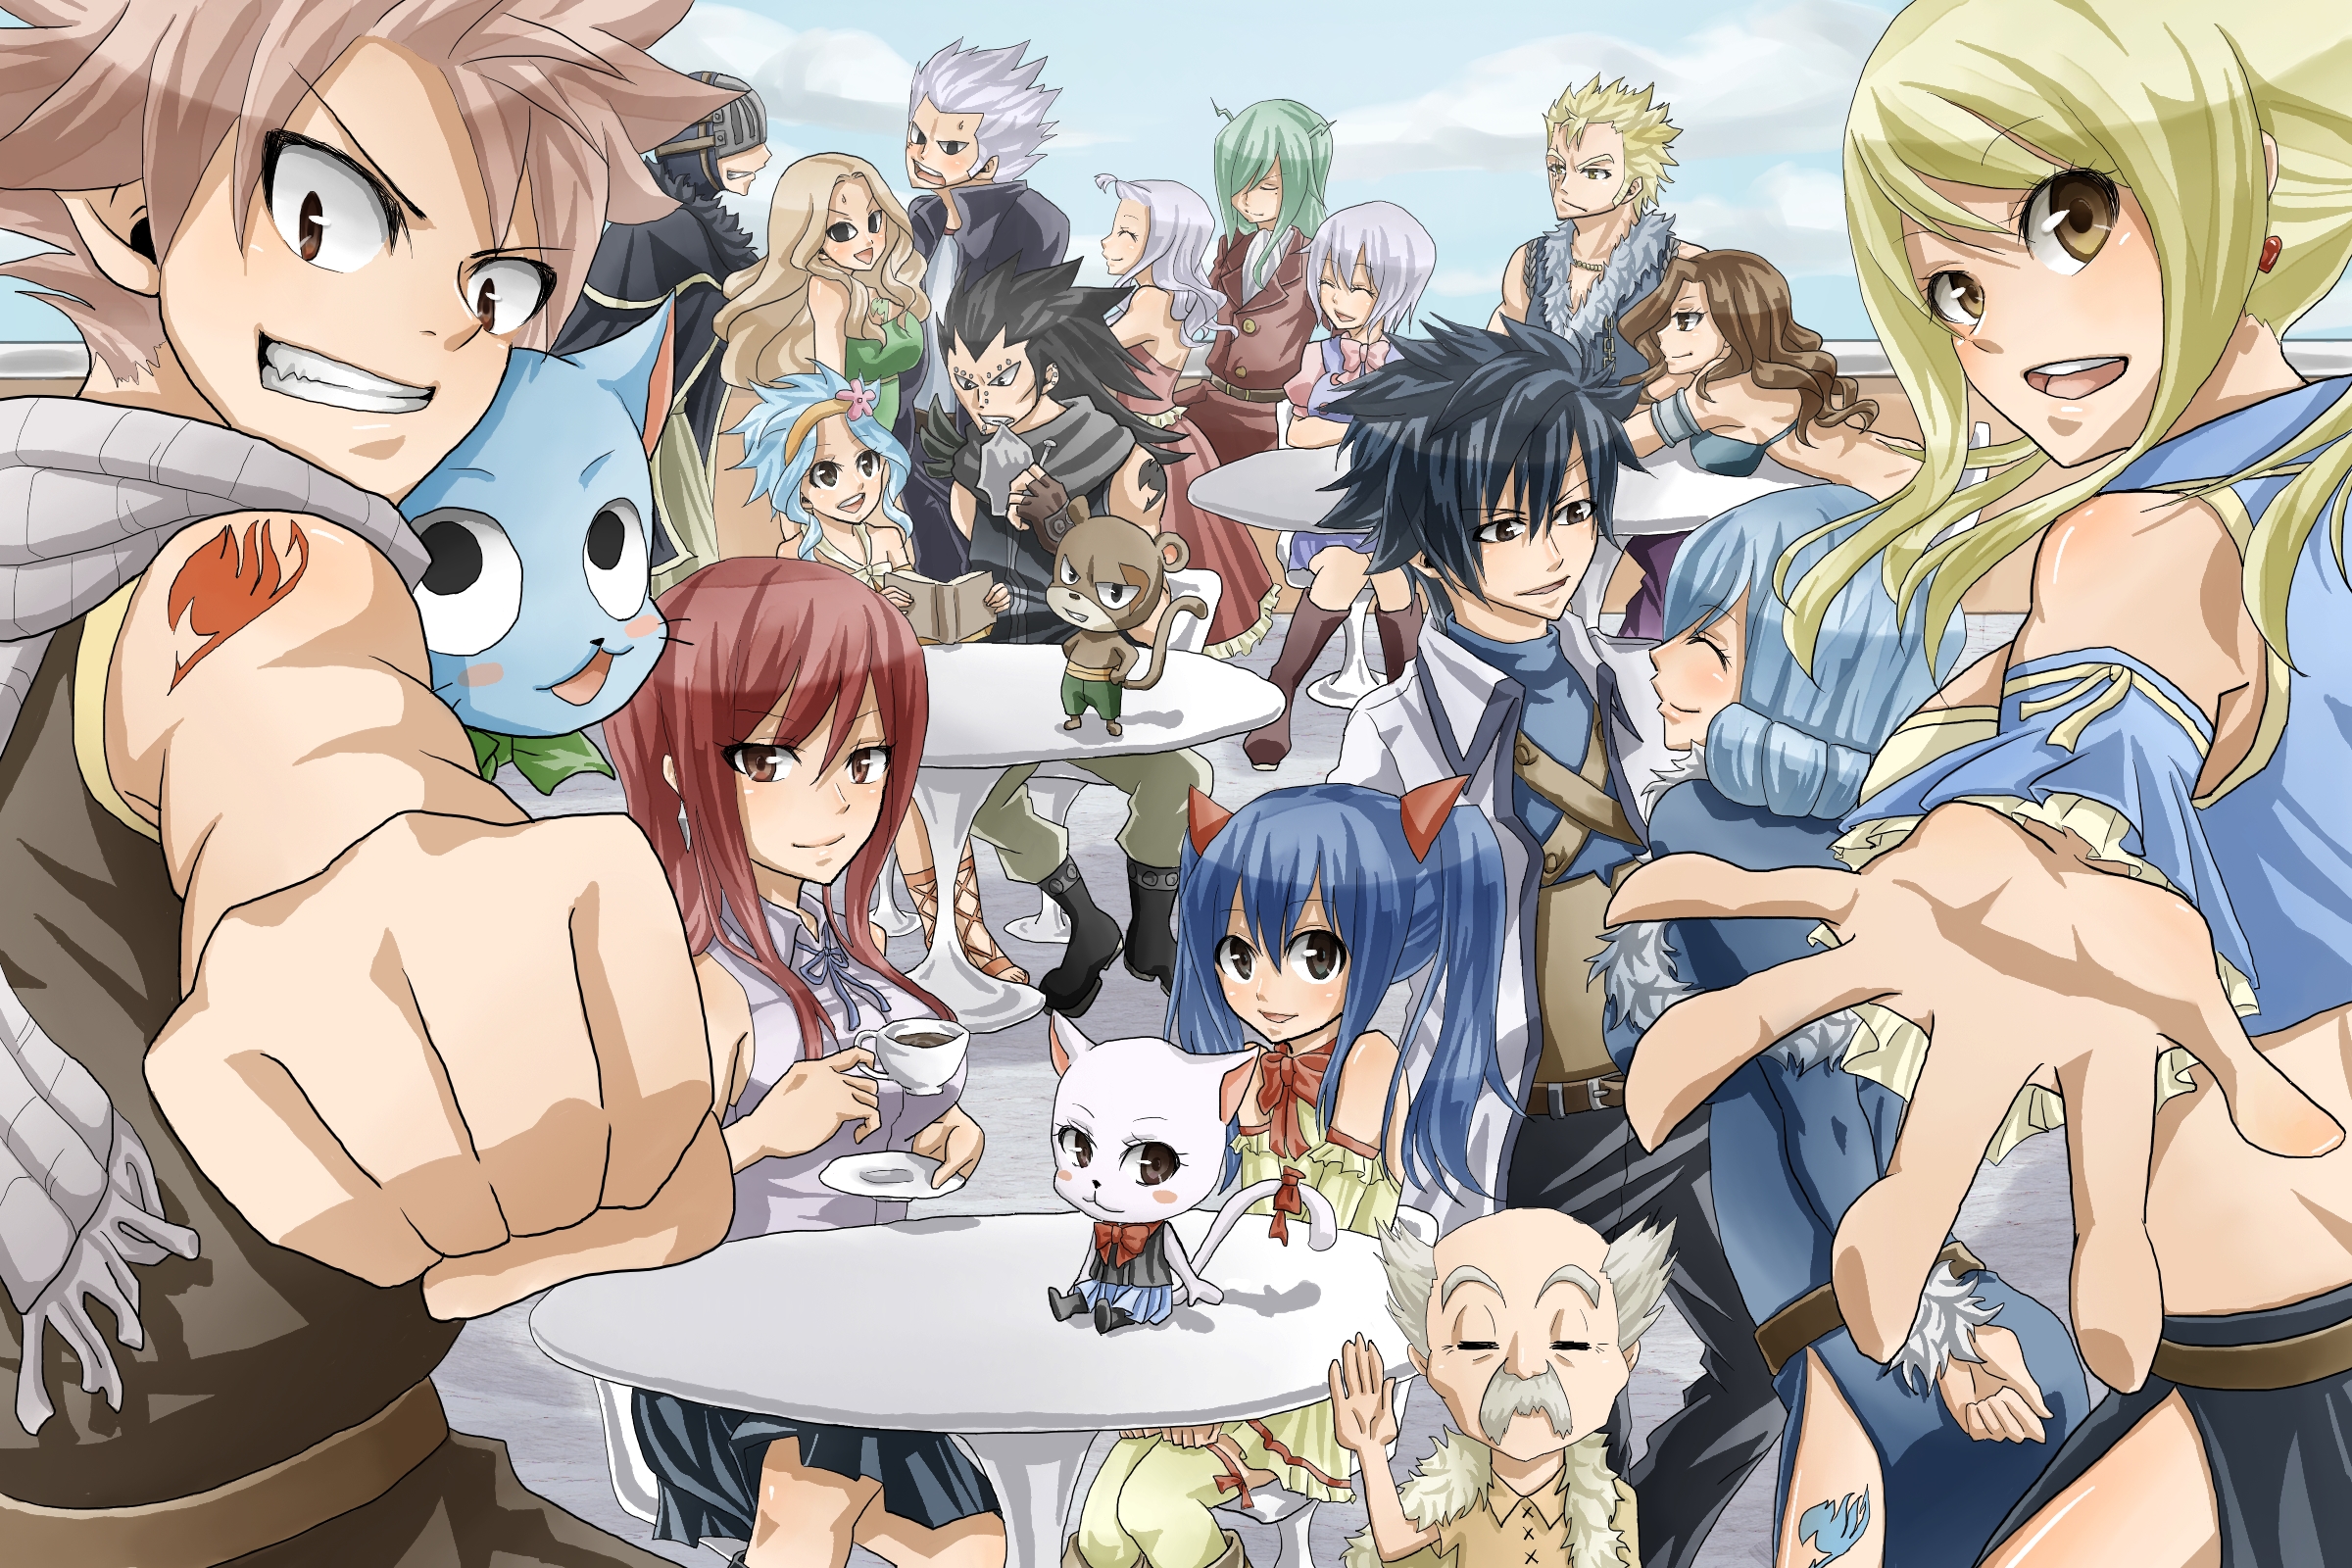 Fairy Tail Wallpaper Hd Related Keywords amp Suggestions